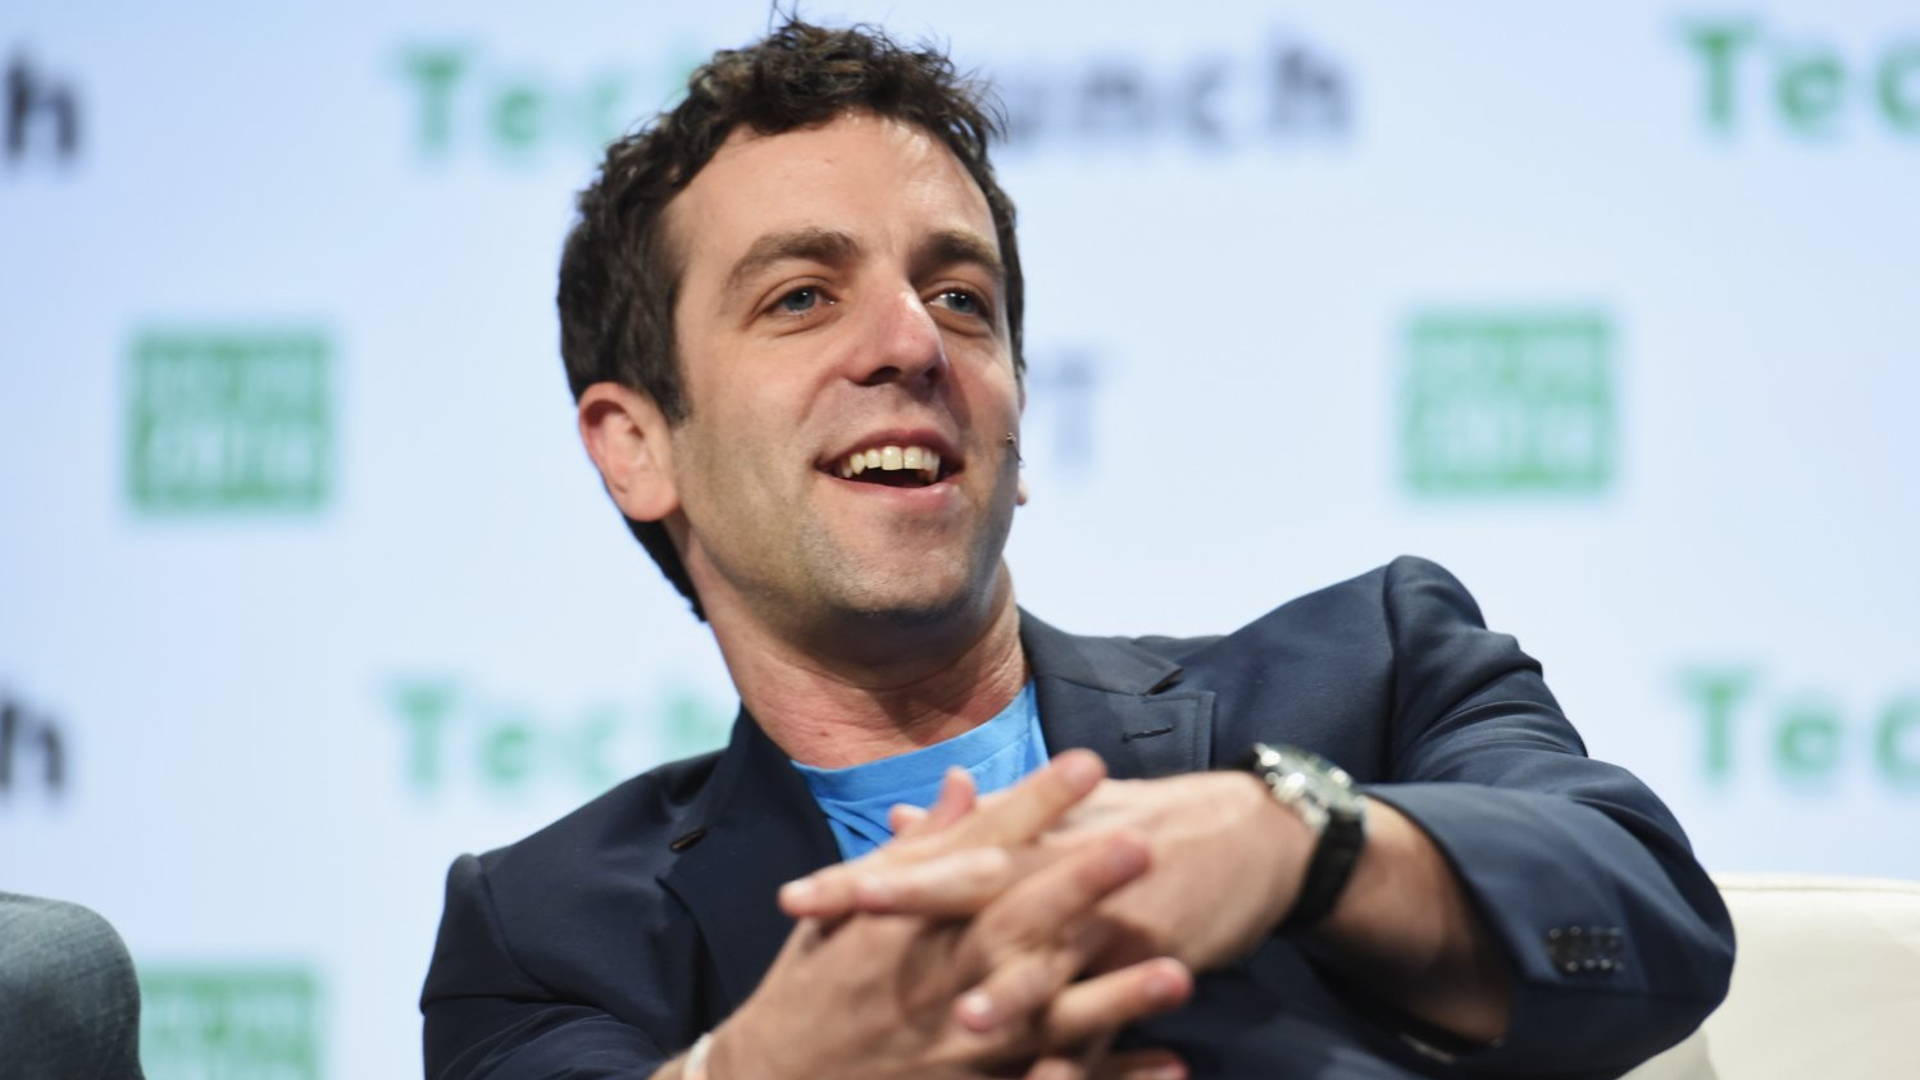 Featured image for 'The Office' Star B.J. Novak Discovers Unlicensed Use Of His Face On Packaging, Isn't Even Mad